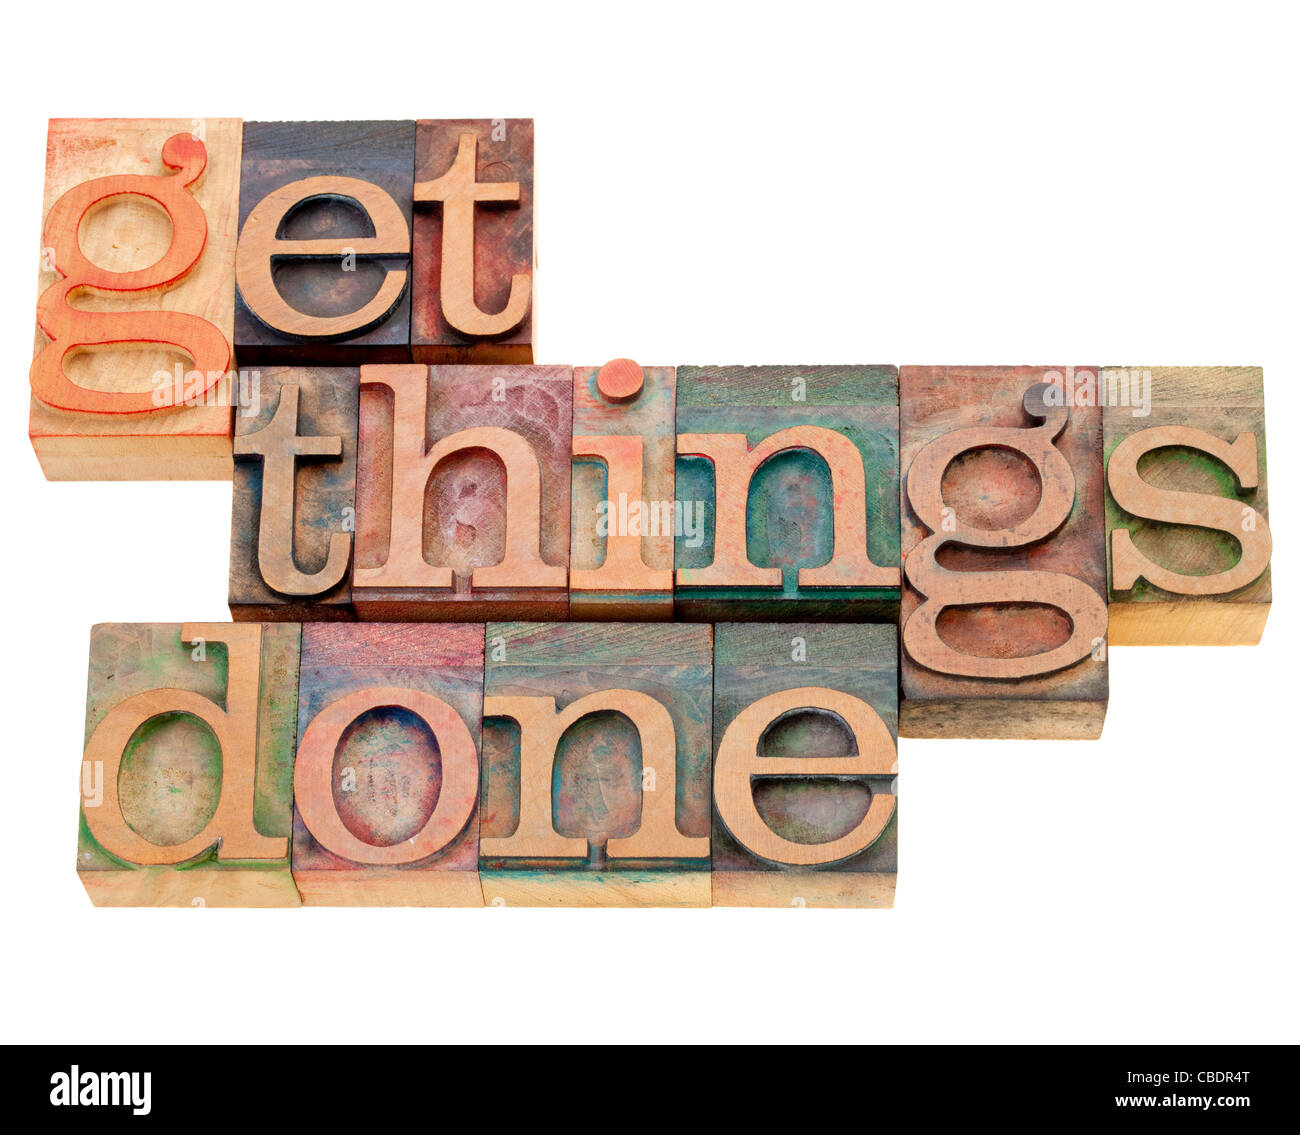 productivity or motivation reminder - get things done - isolated text in vintage wood letterpress printing blocks Stock Photo